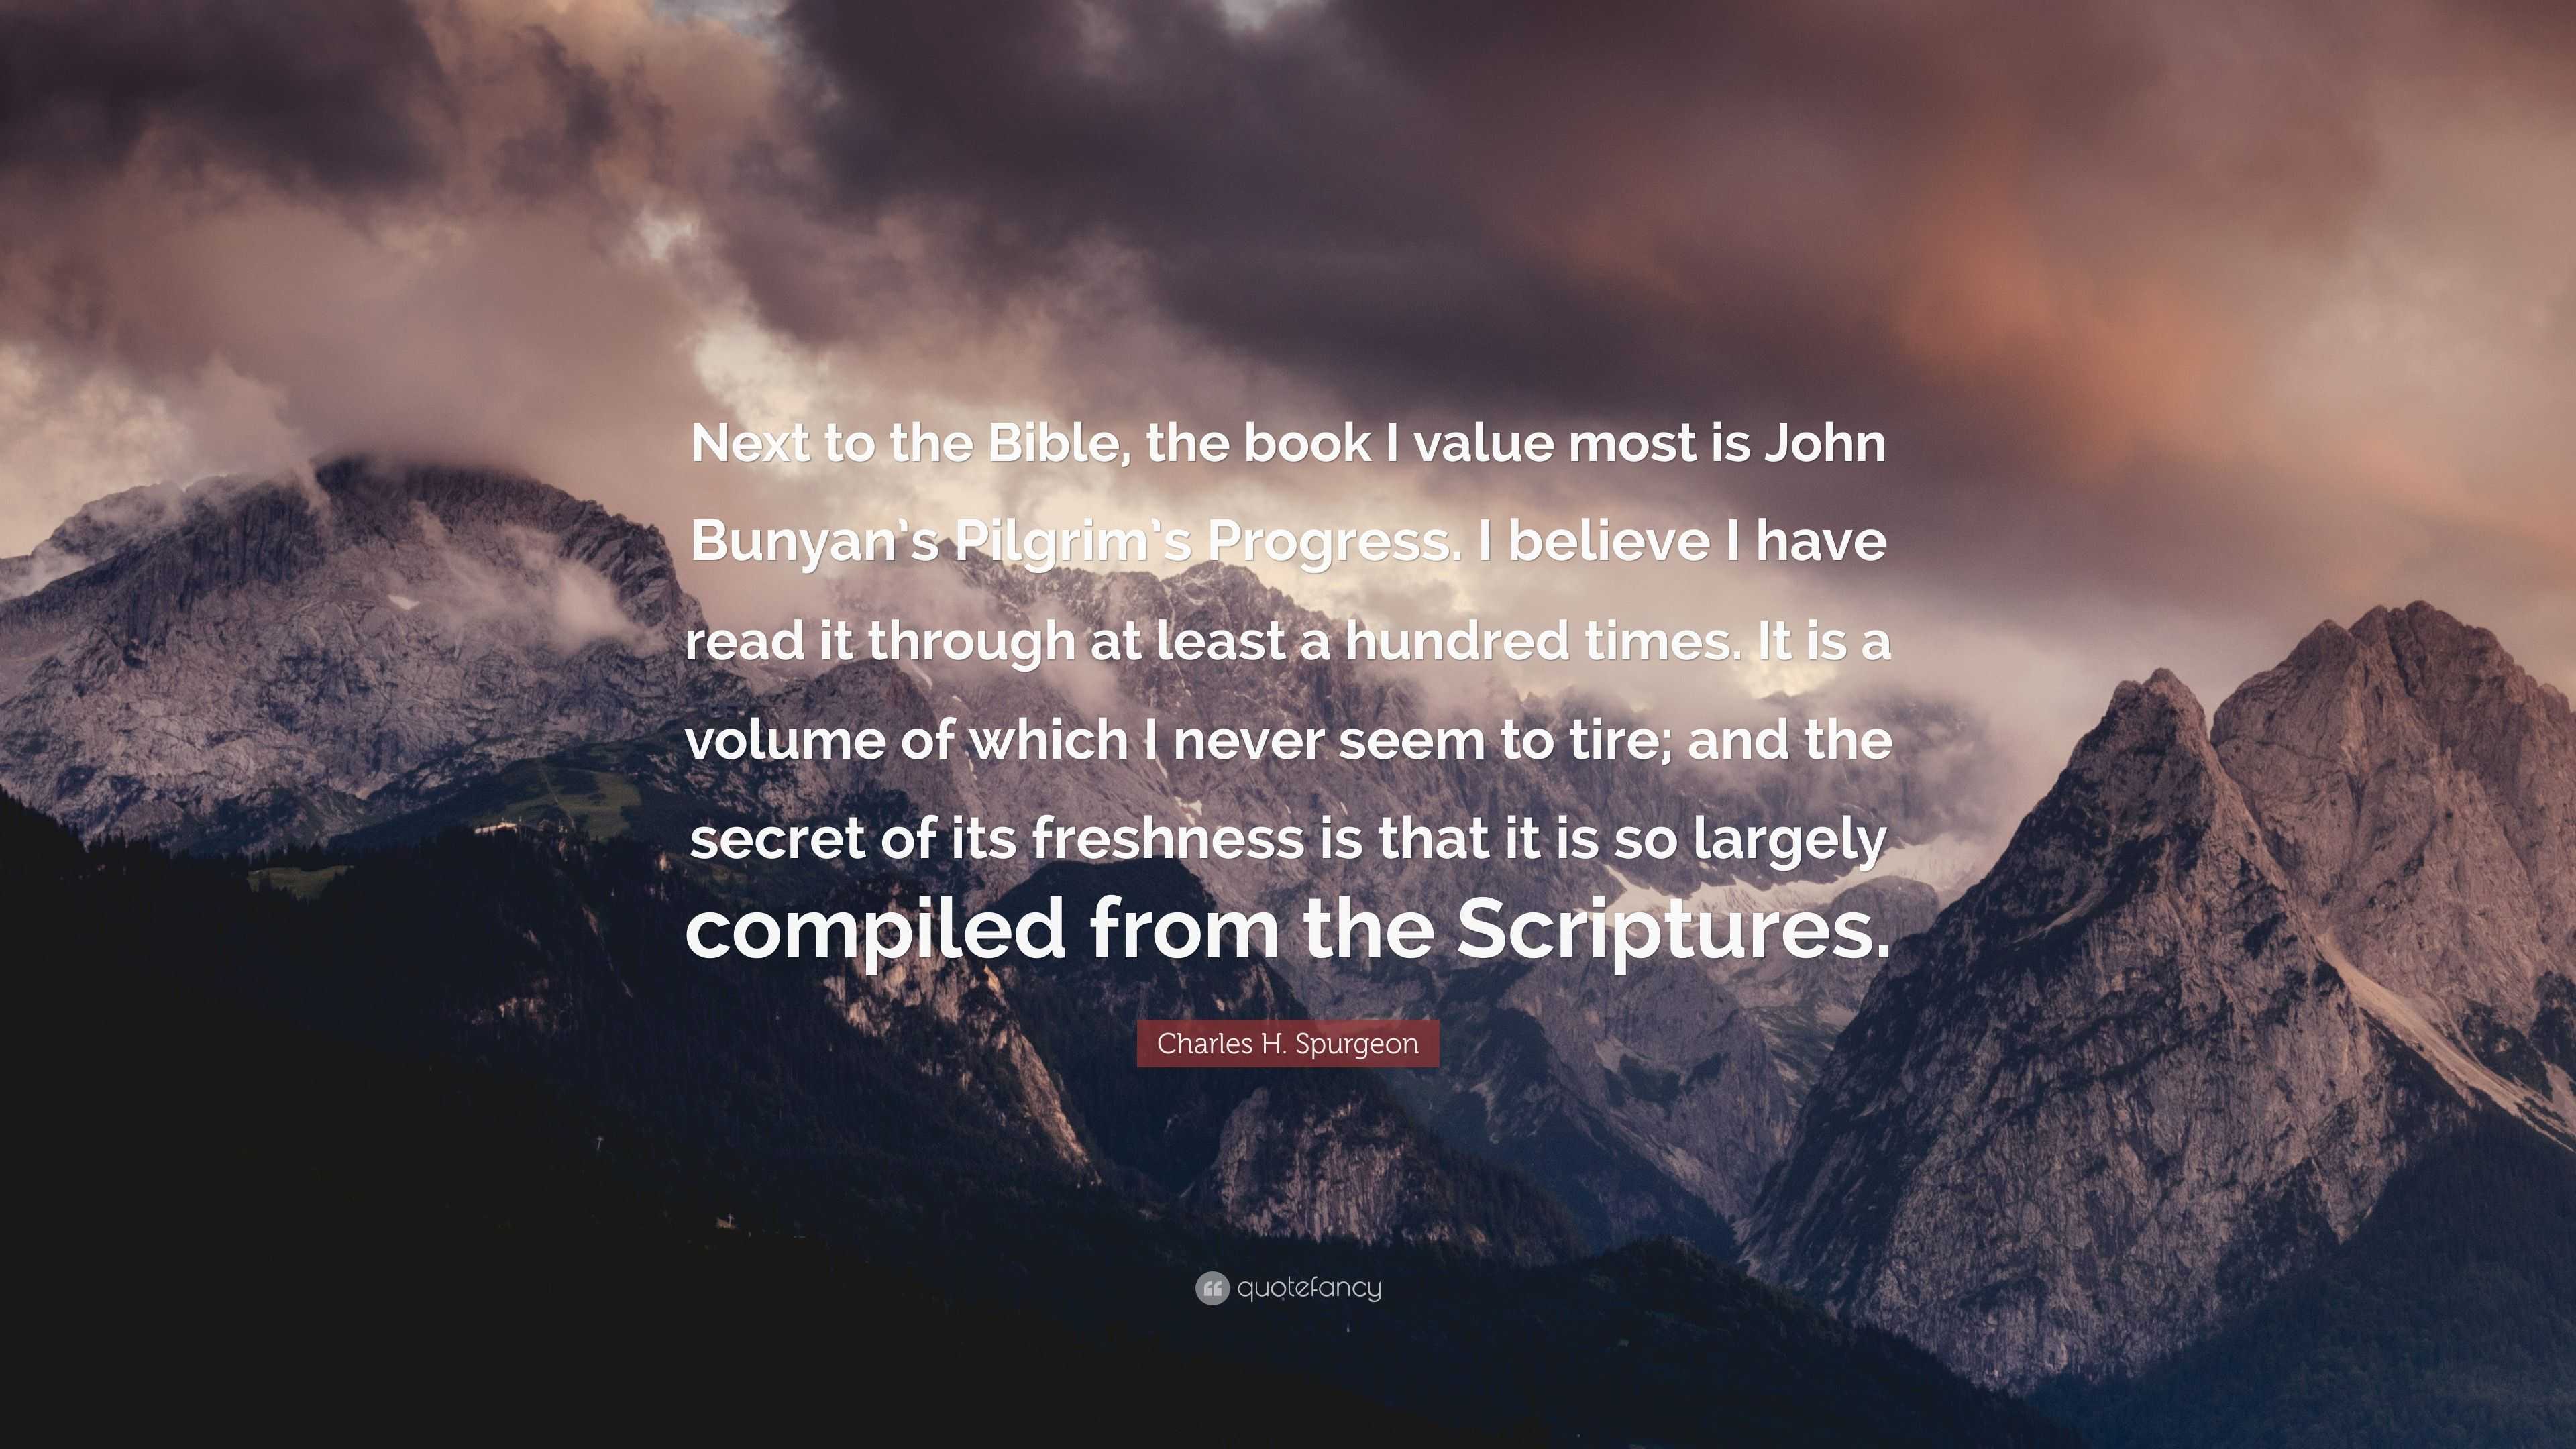 Charles H. Spurgeon Quote: “Next To The Bible, The Book I Value Most Is John Bunyan's Pilgrim's Progress. I Believe I Have Read It Through At Least ...”